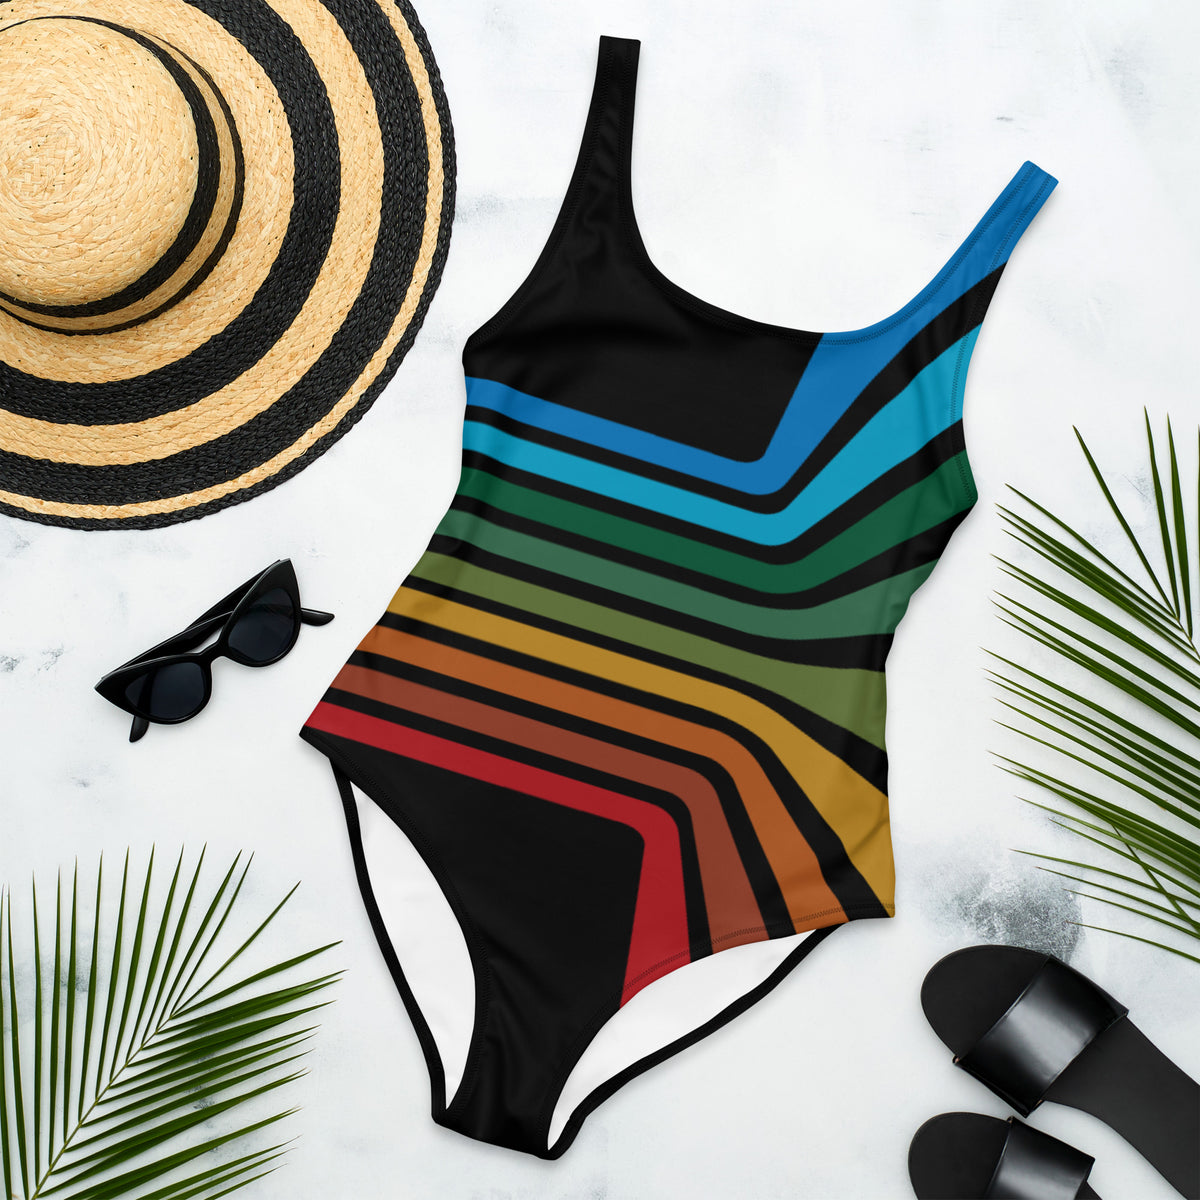 Retro IV Vintage Style Color Bar One-Piece Swimsuit - Best Seller - Area F Island Clothing